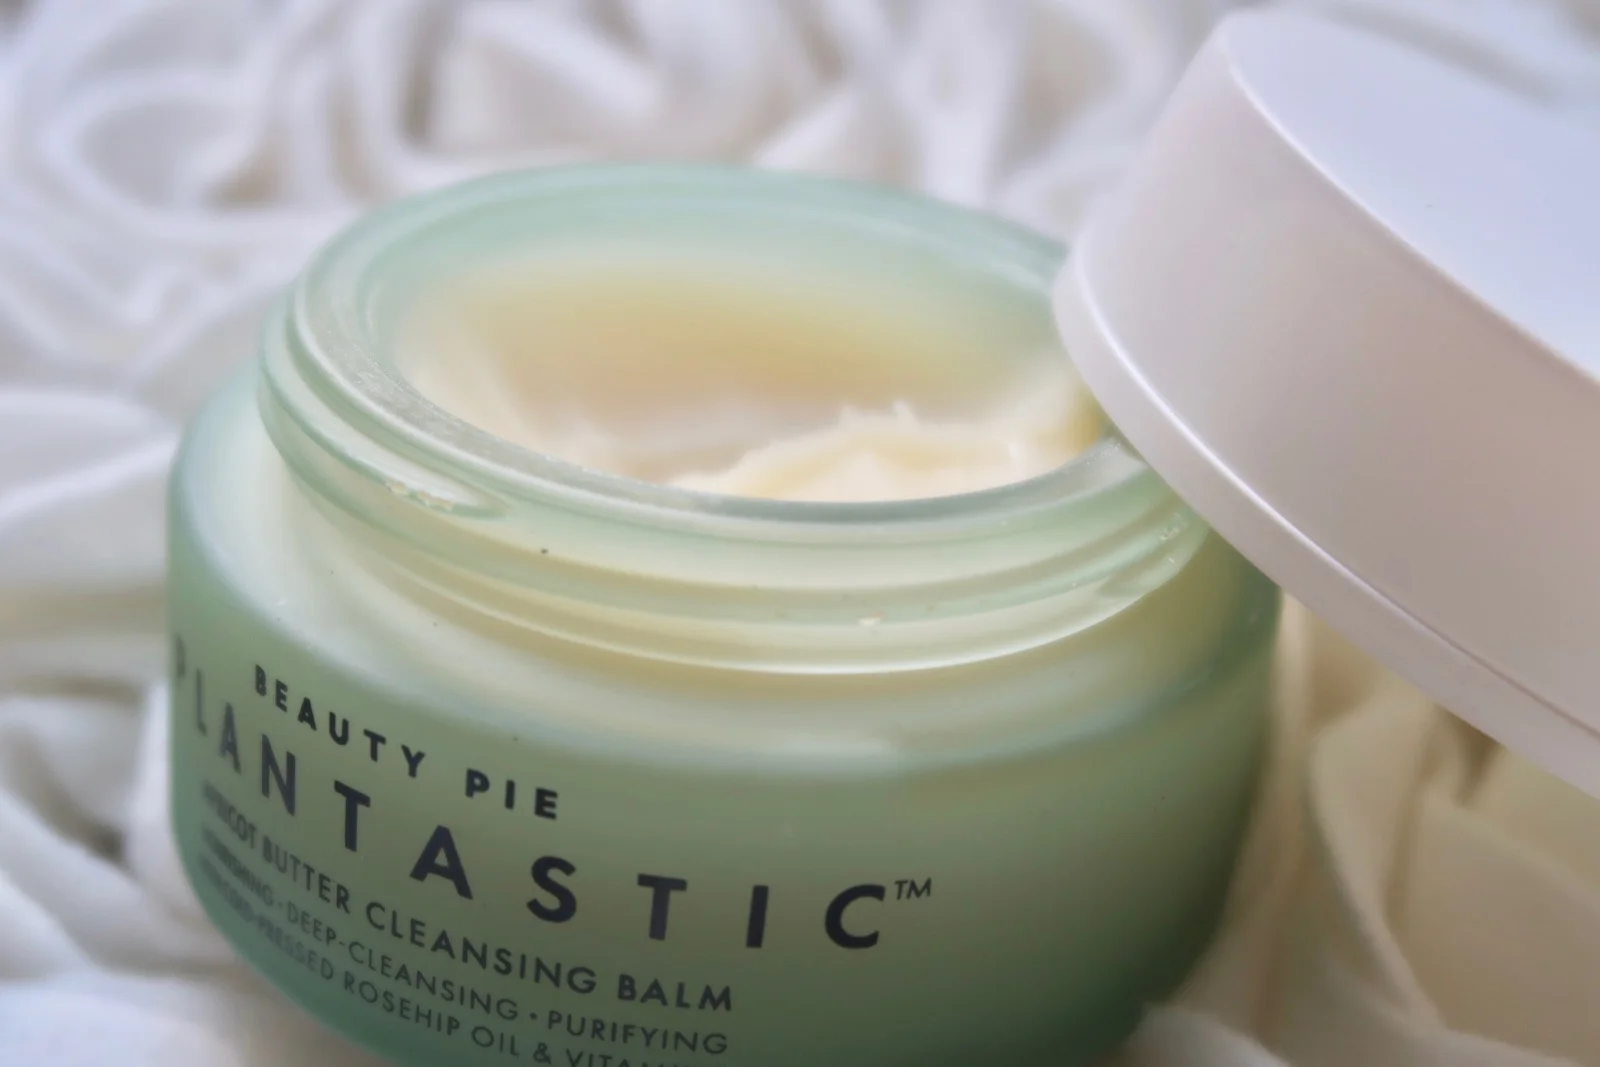 Skincare Review: Beauty Pie’s Apricot Cleansing Balm